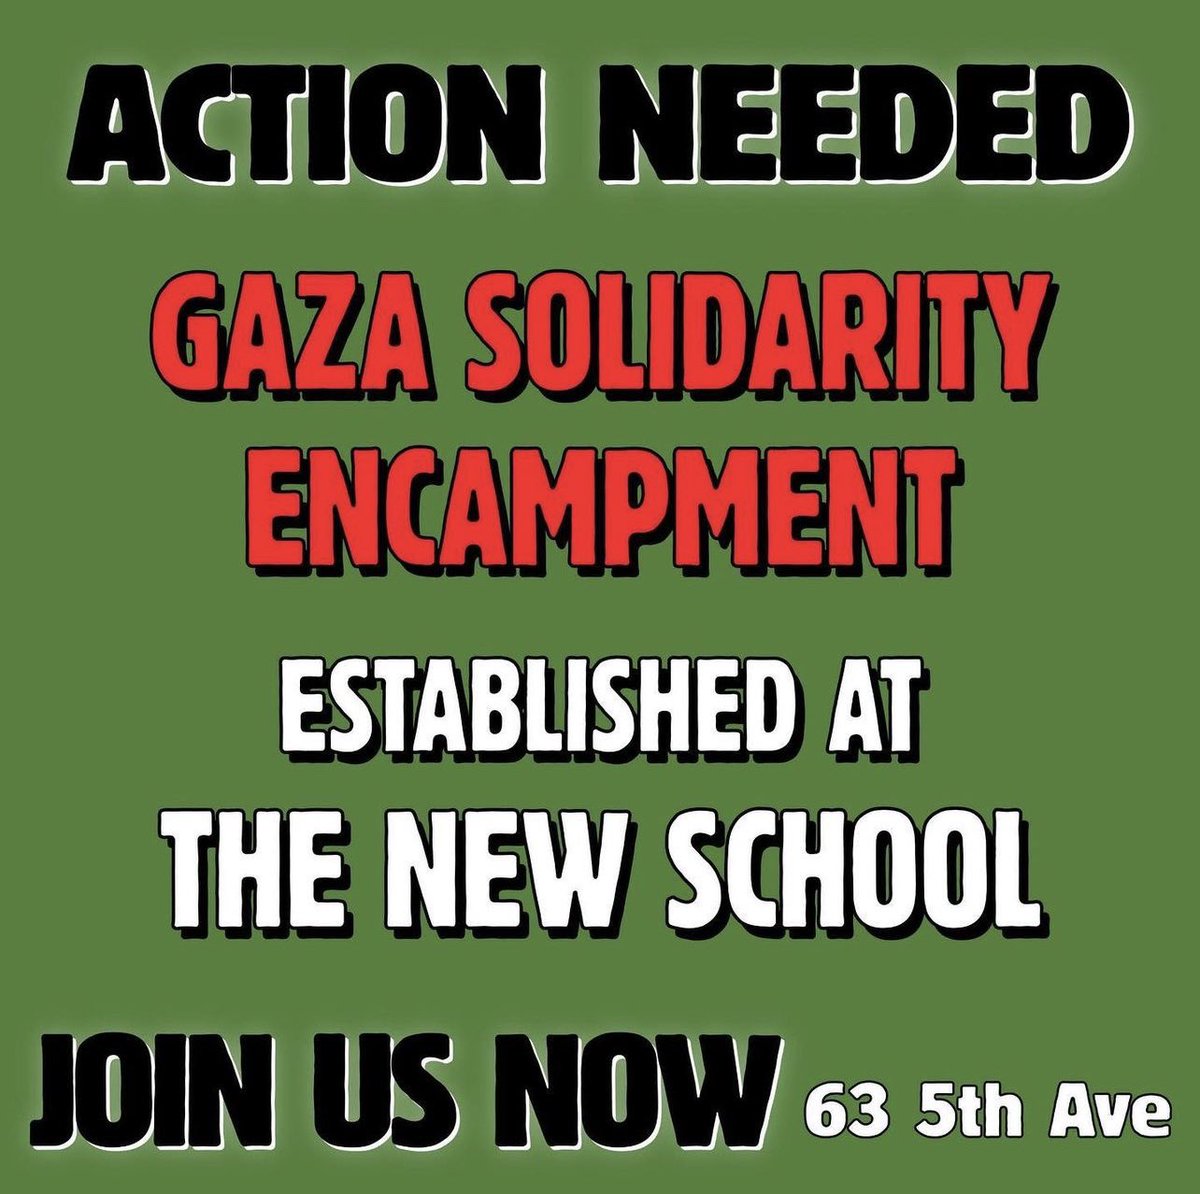 🚨 BREAKING 🚨 All power to the students at The New School who have now established their own Gaza Solidarity Encampment!! Their demands include: divesting from death, protecting pro-Palestine protestors, and enacting full academic boycott of the Zionist entity—Support them now!